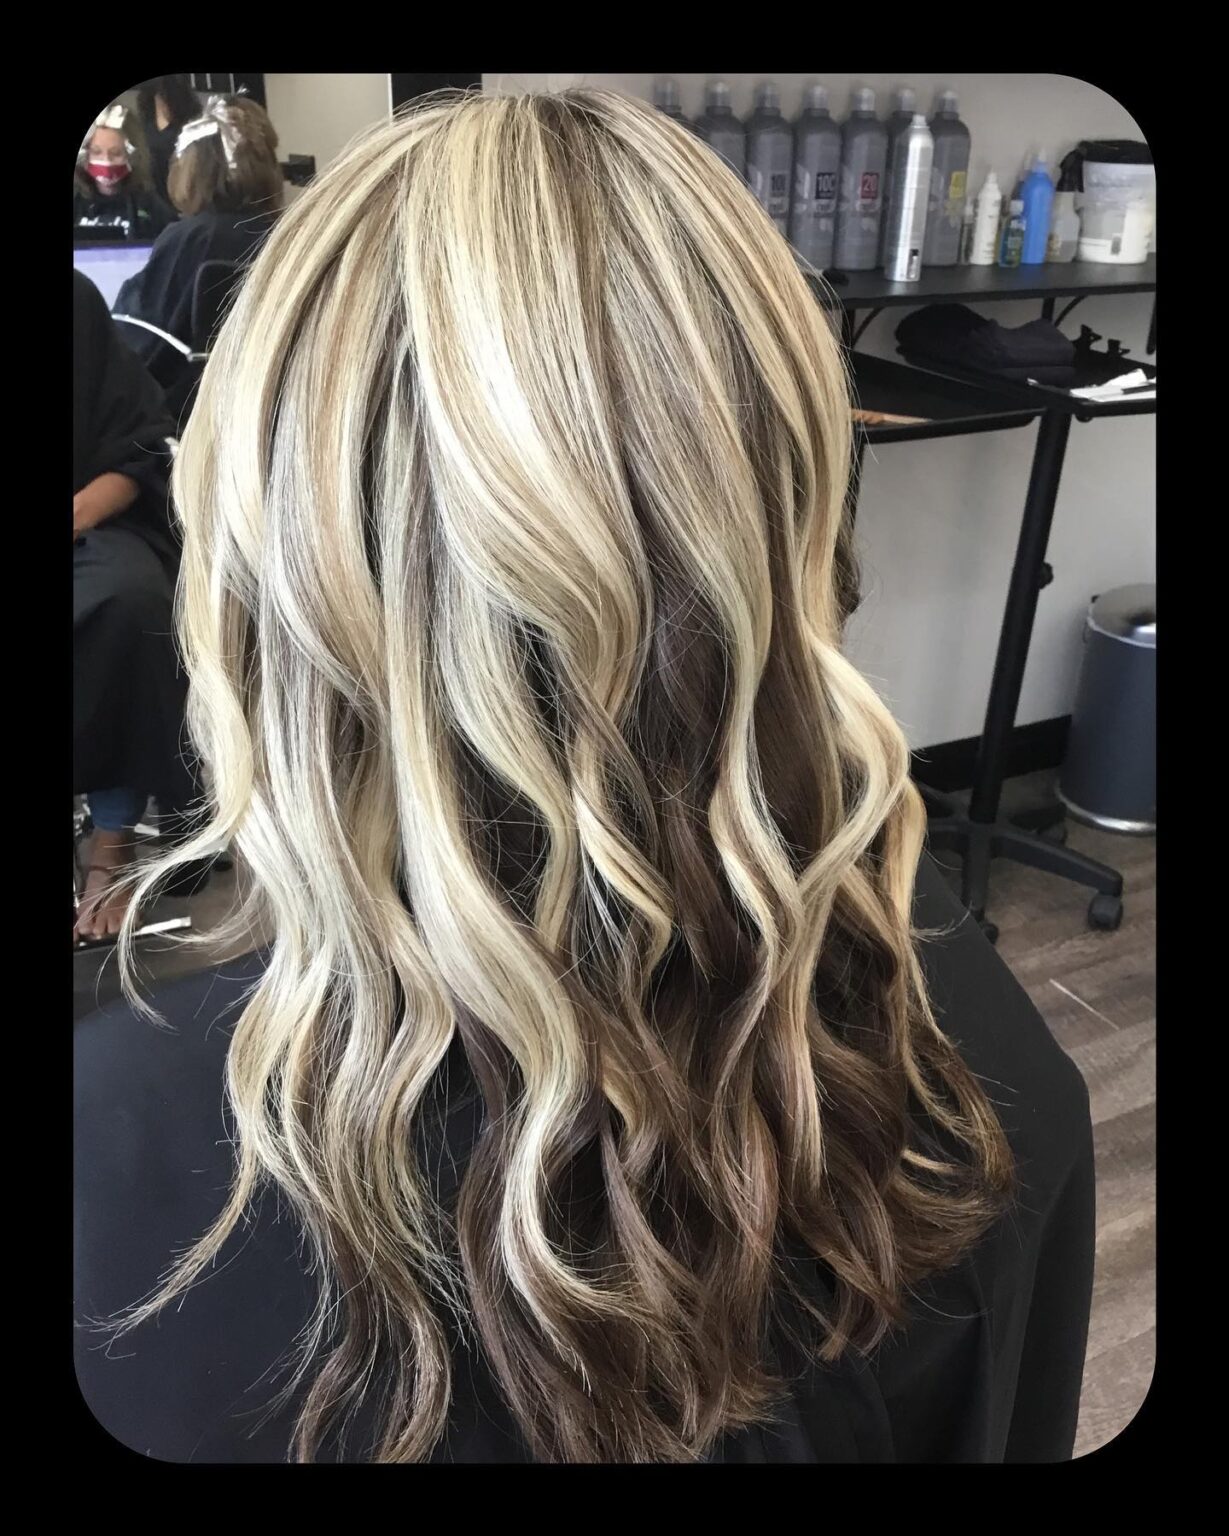 LuLu Salon – HAIR STYLING FOR EVERY OCCASION